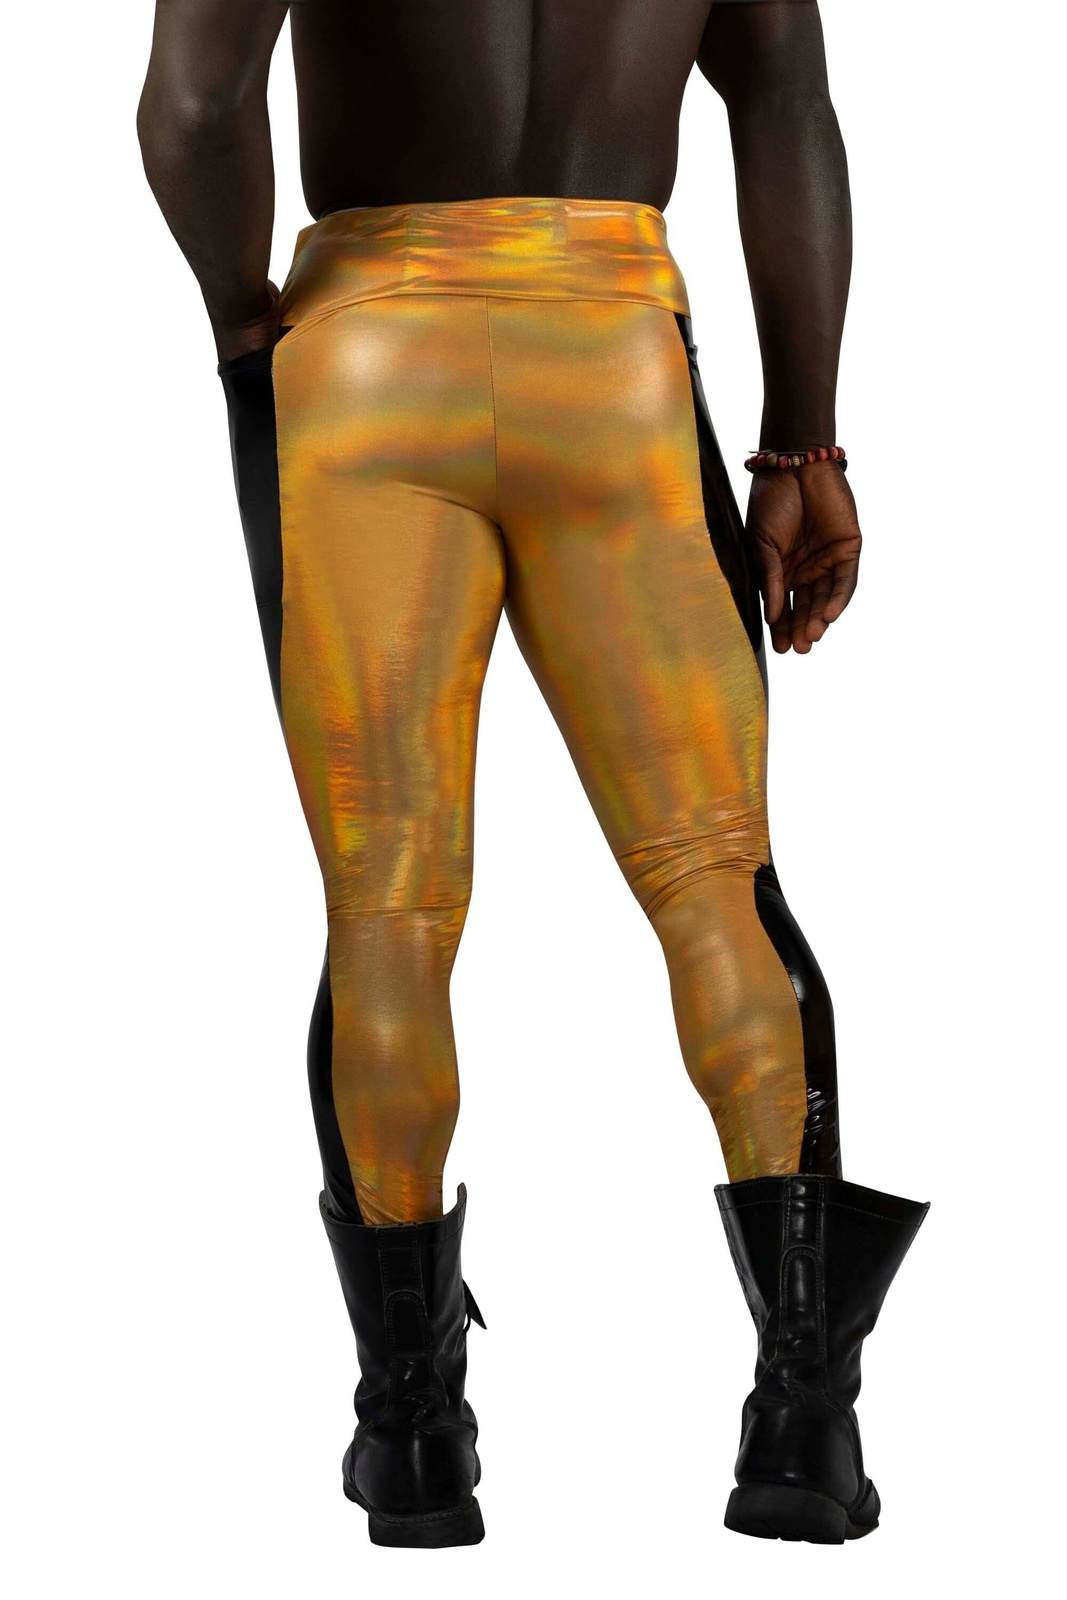 Holographic Gold Mens Rave Pants with Pockets by Love Khaos mens festival clothing brand.